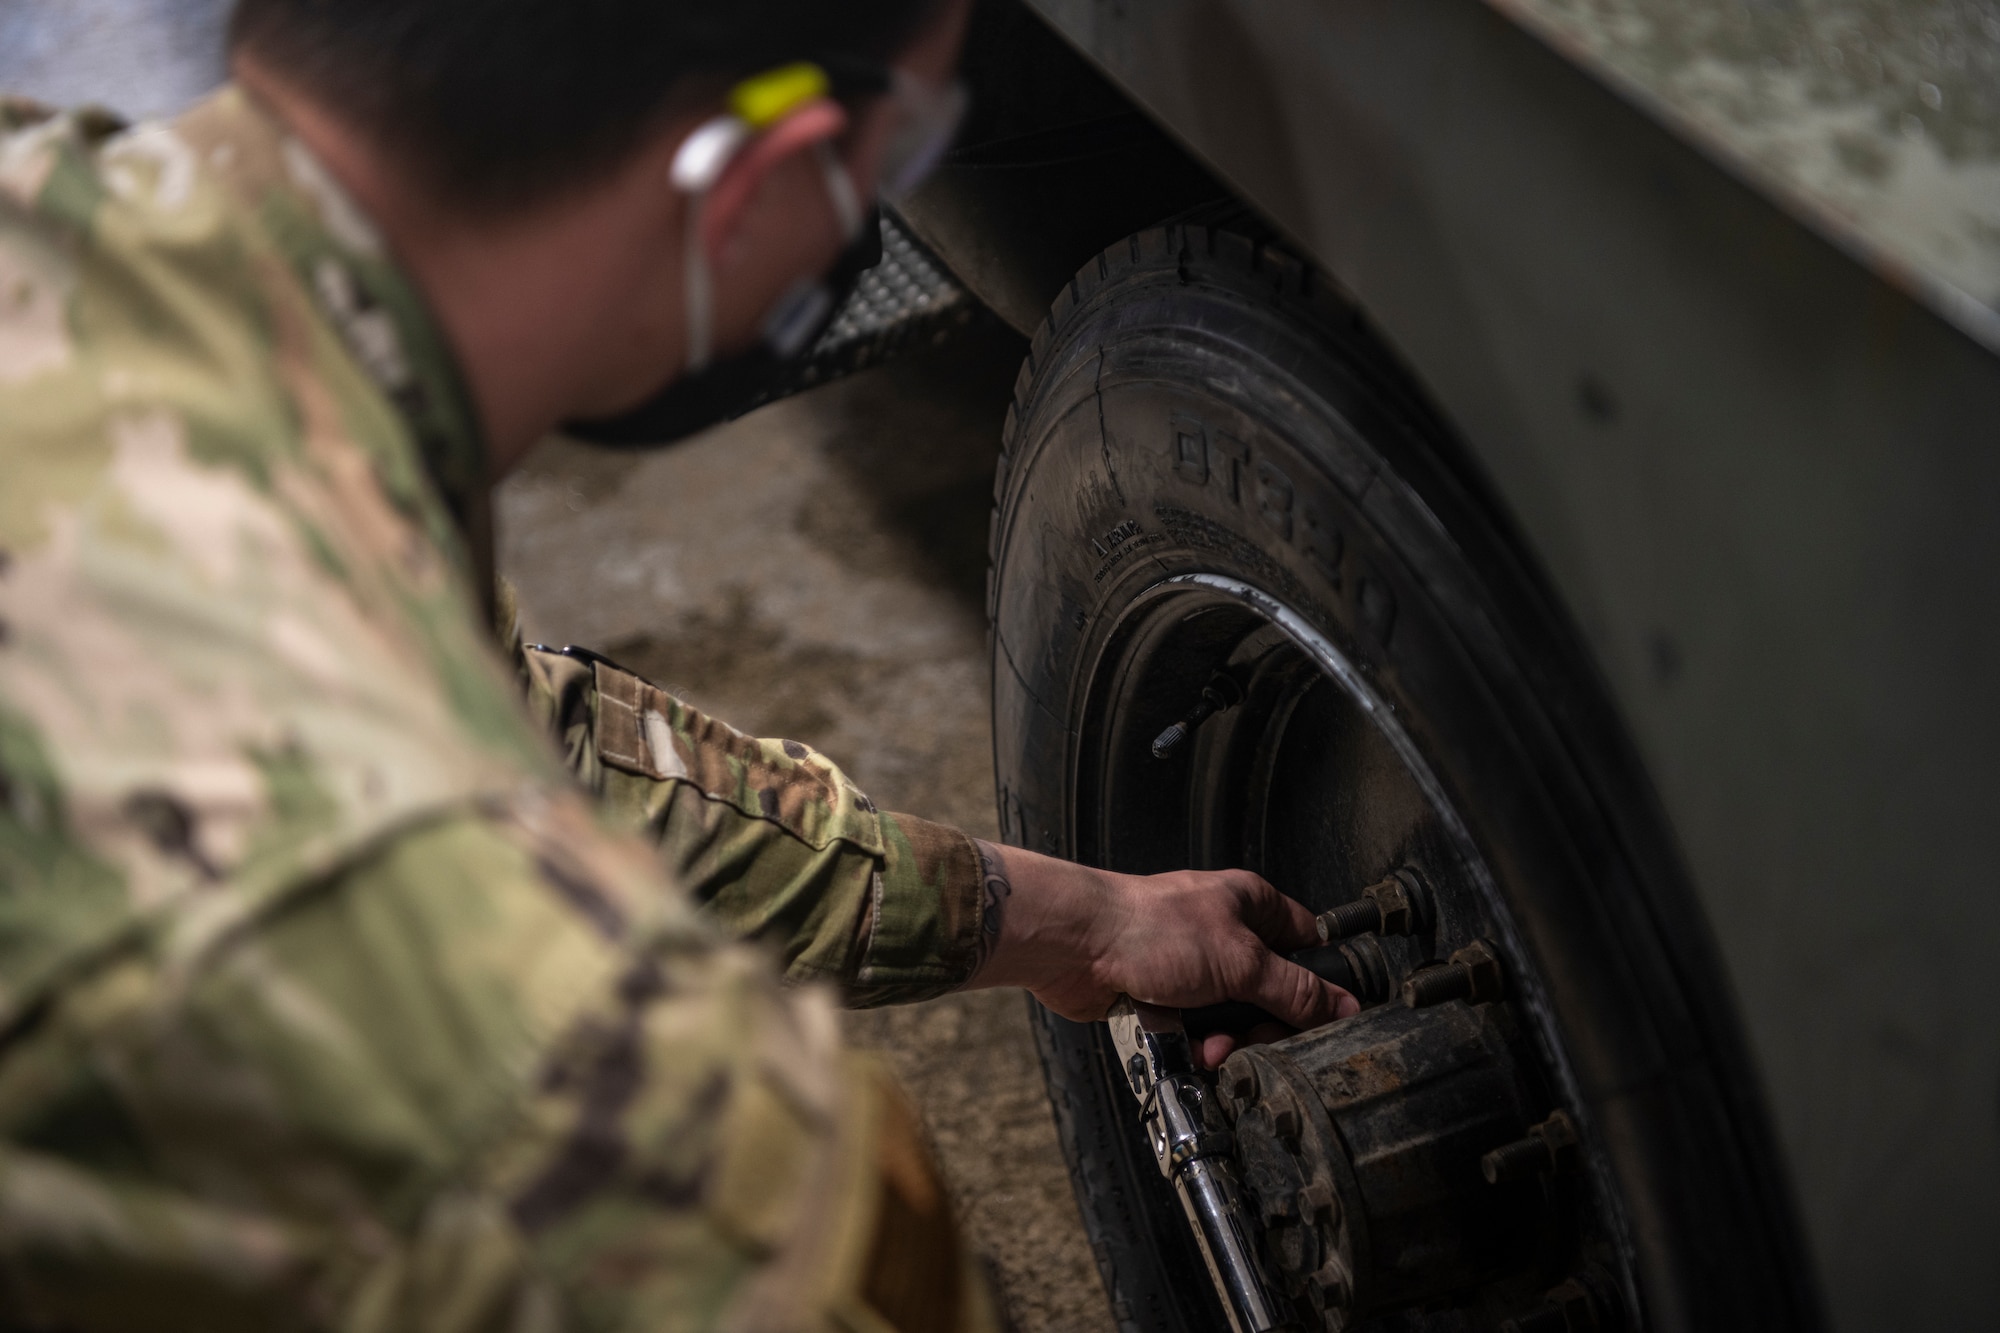 Airman using a torque wrench to tighten a screw nut on a truck.